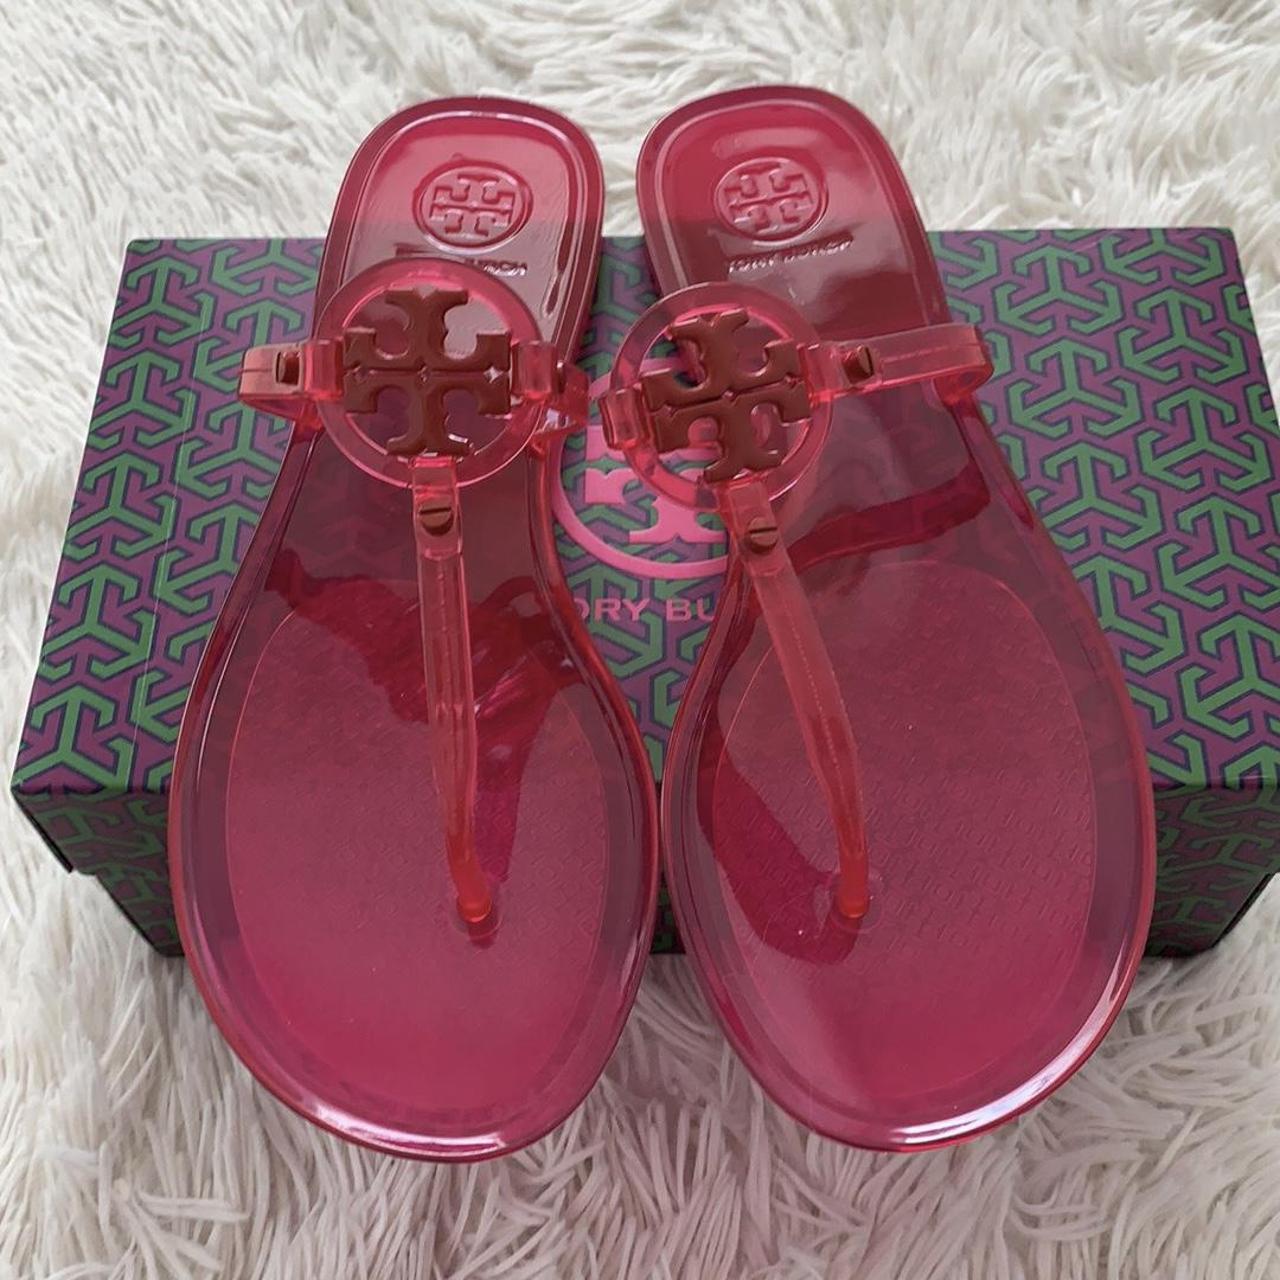 Tory Burch Women's Pink and Red Sandals | Depop